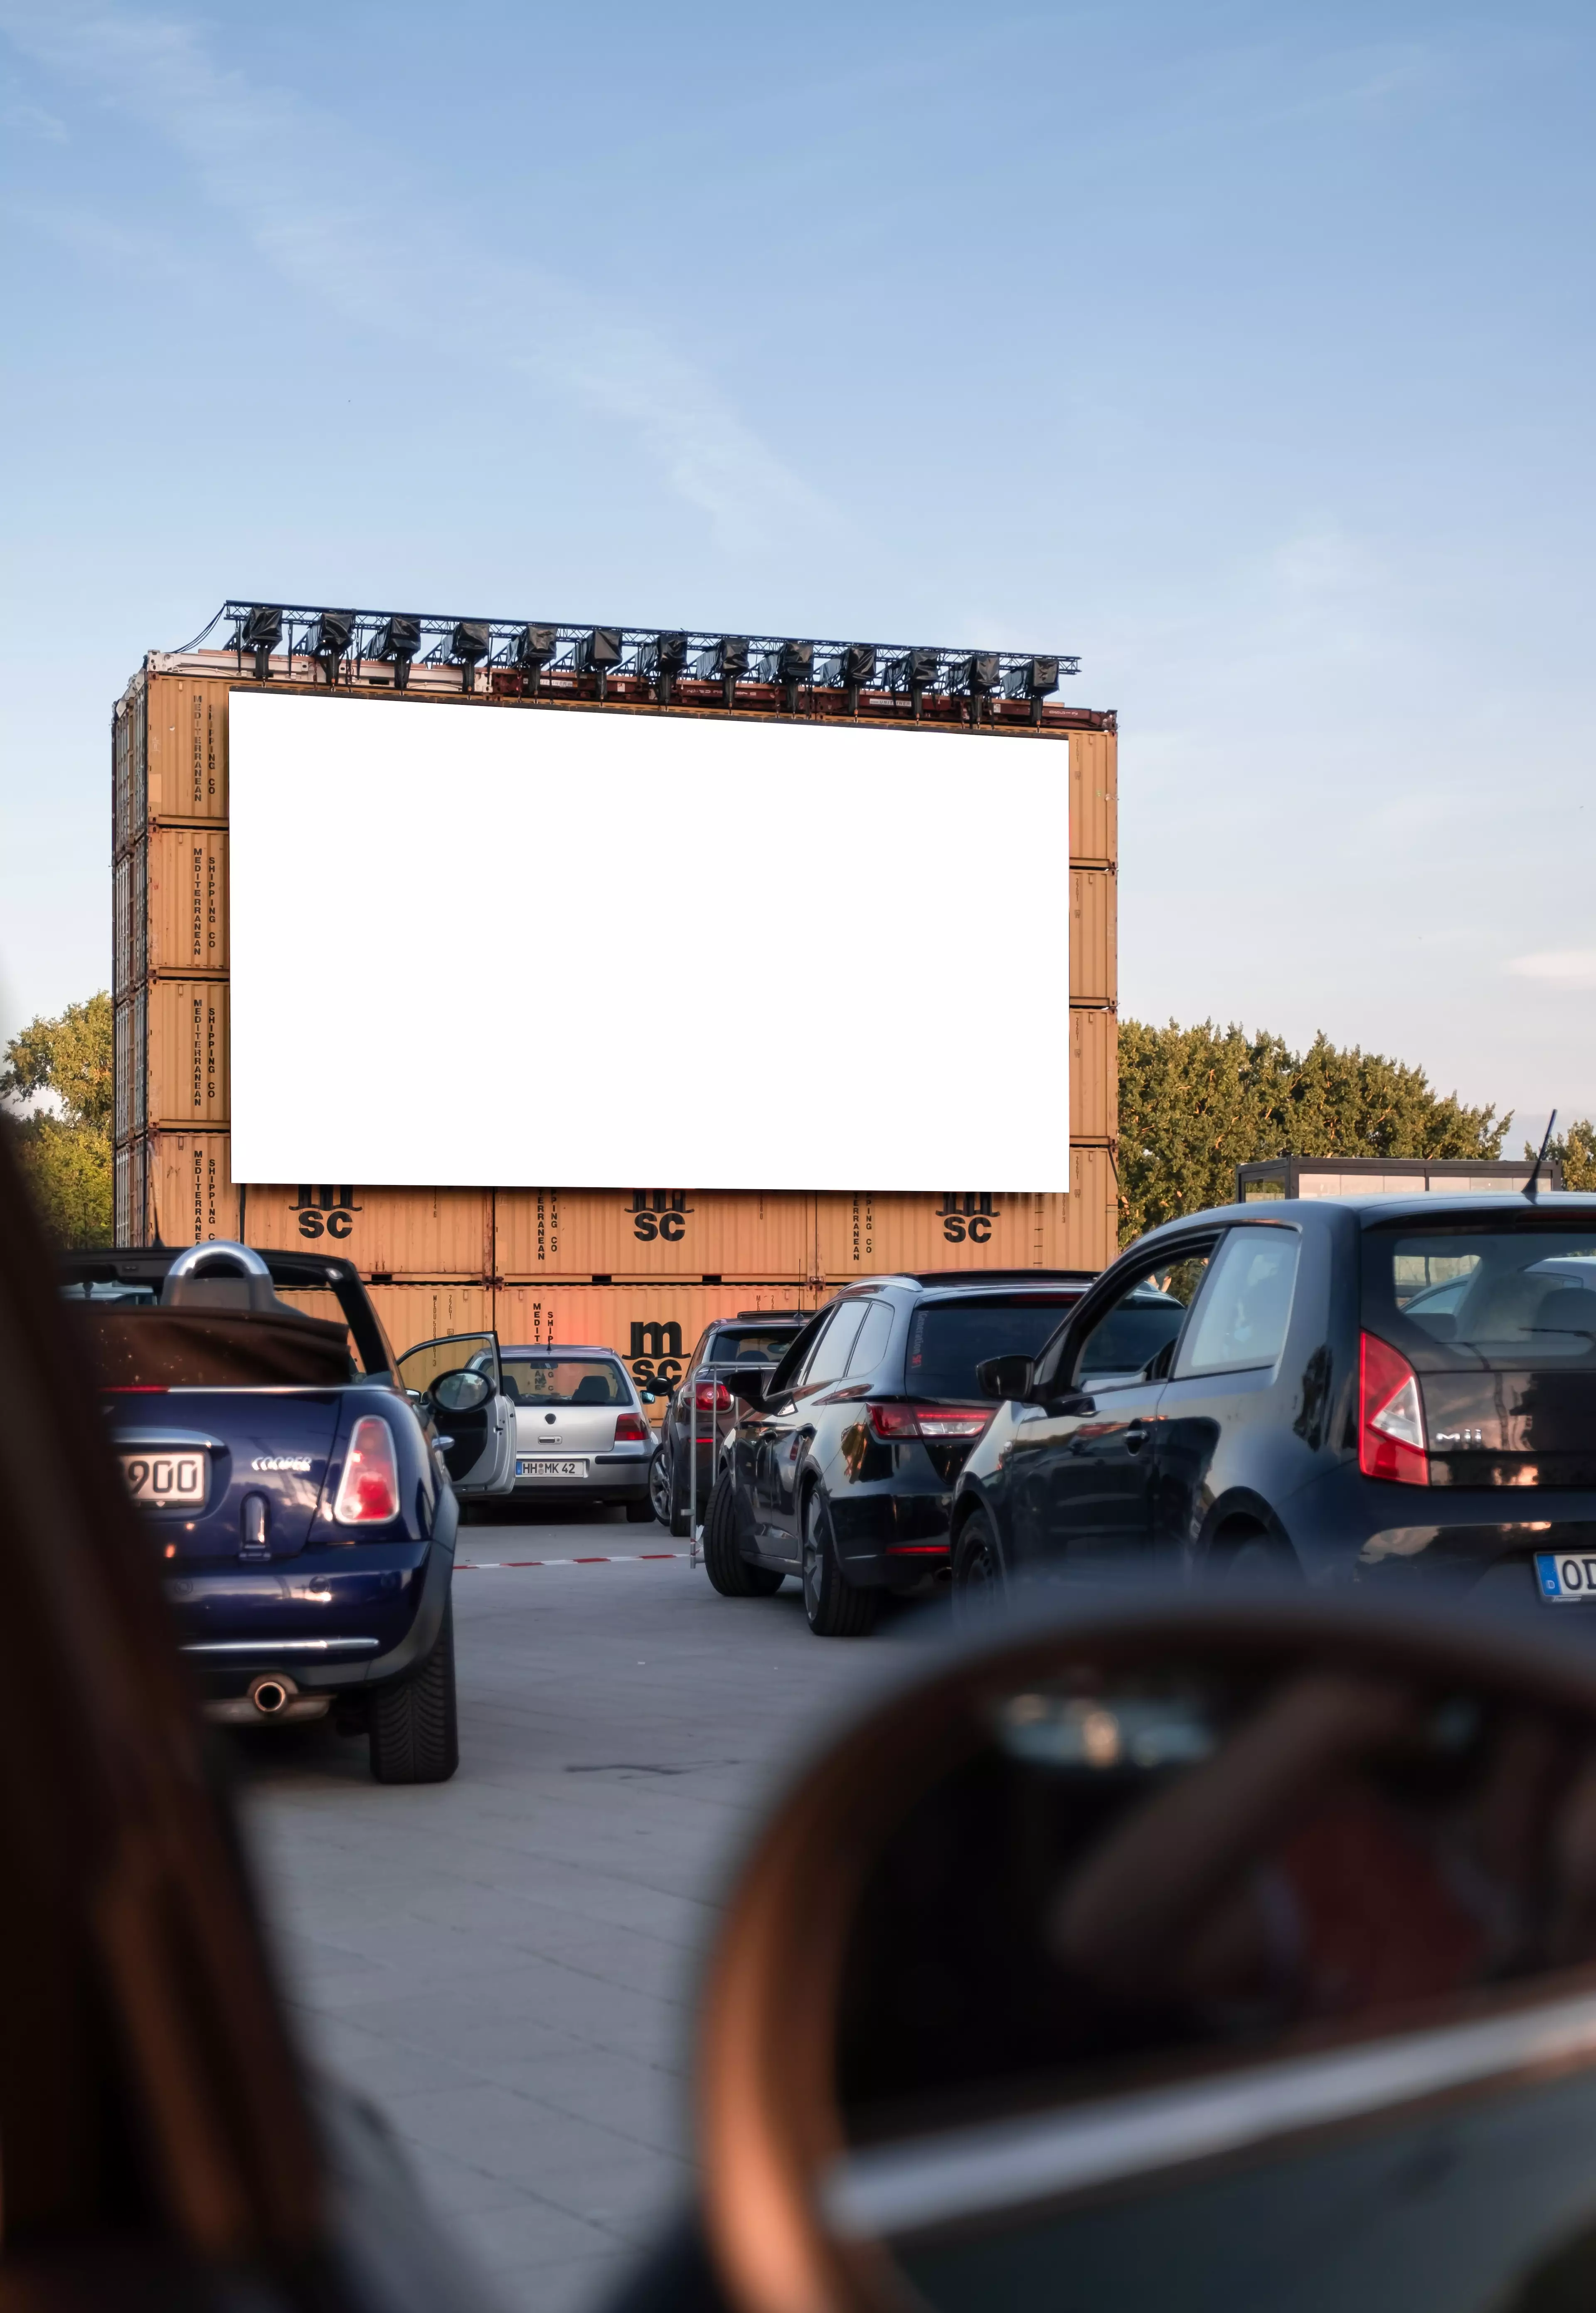 It's a drive-in event, so you'll need a vehicle (